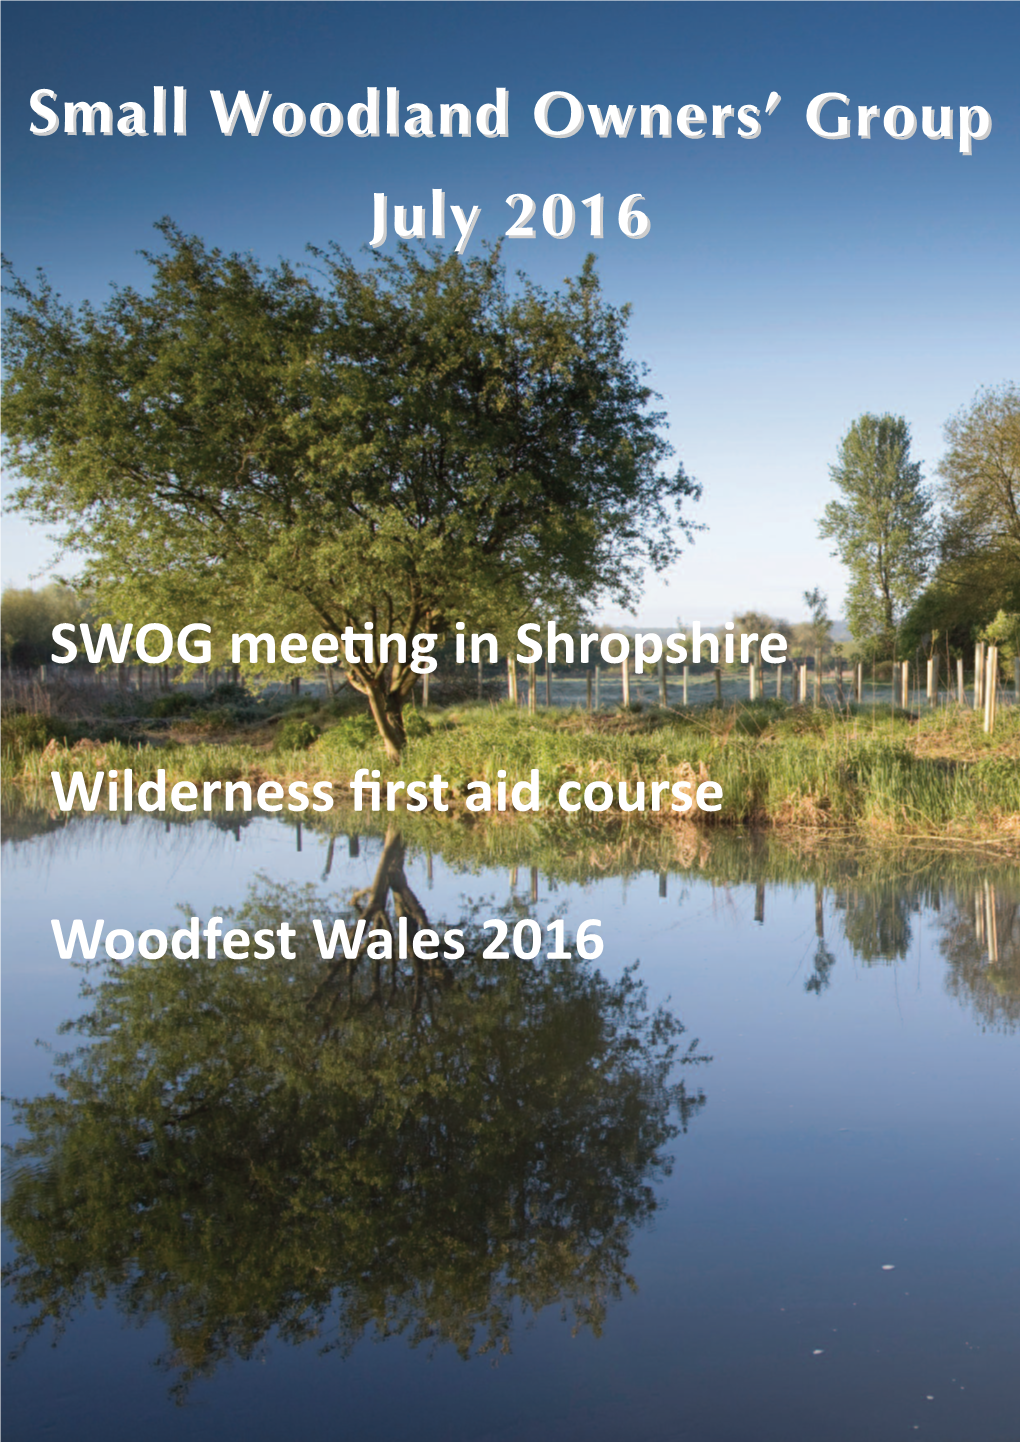 Small Woodland Owners' Group SWOG Meeting in Shropshire